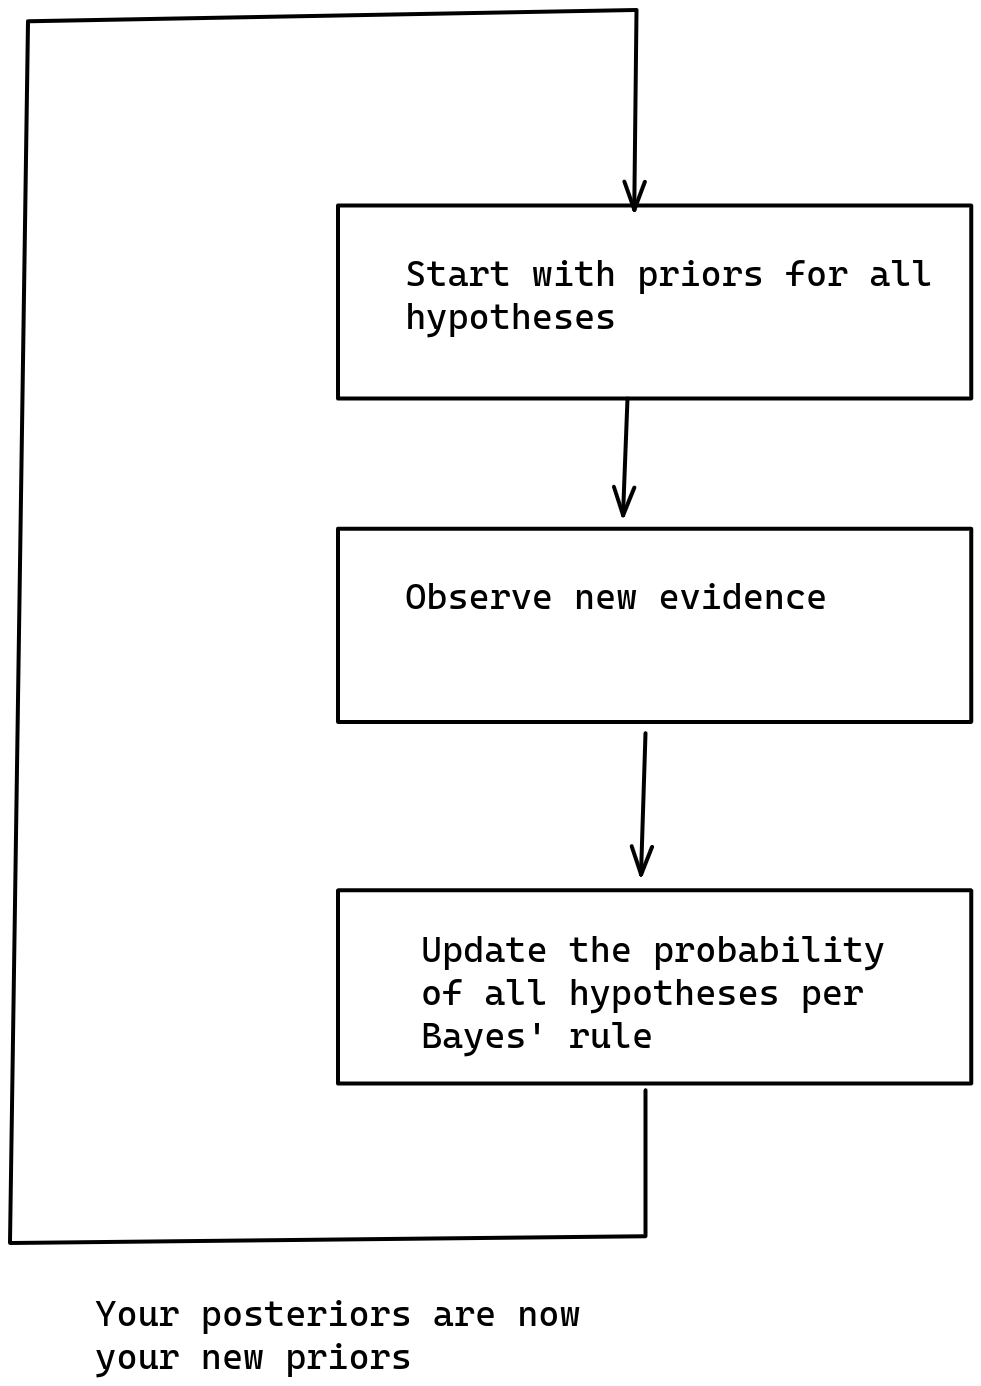 pictorial depiction of the Bayesian algorithm